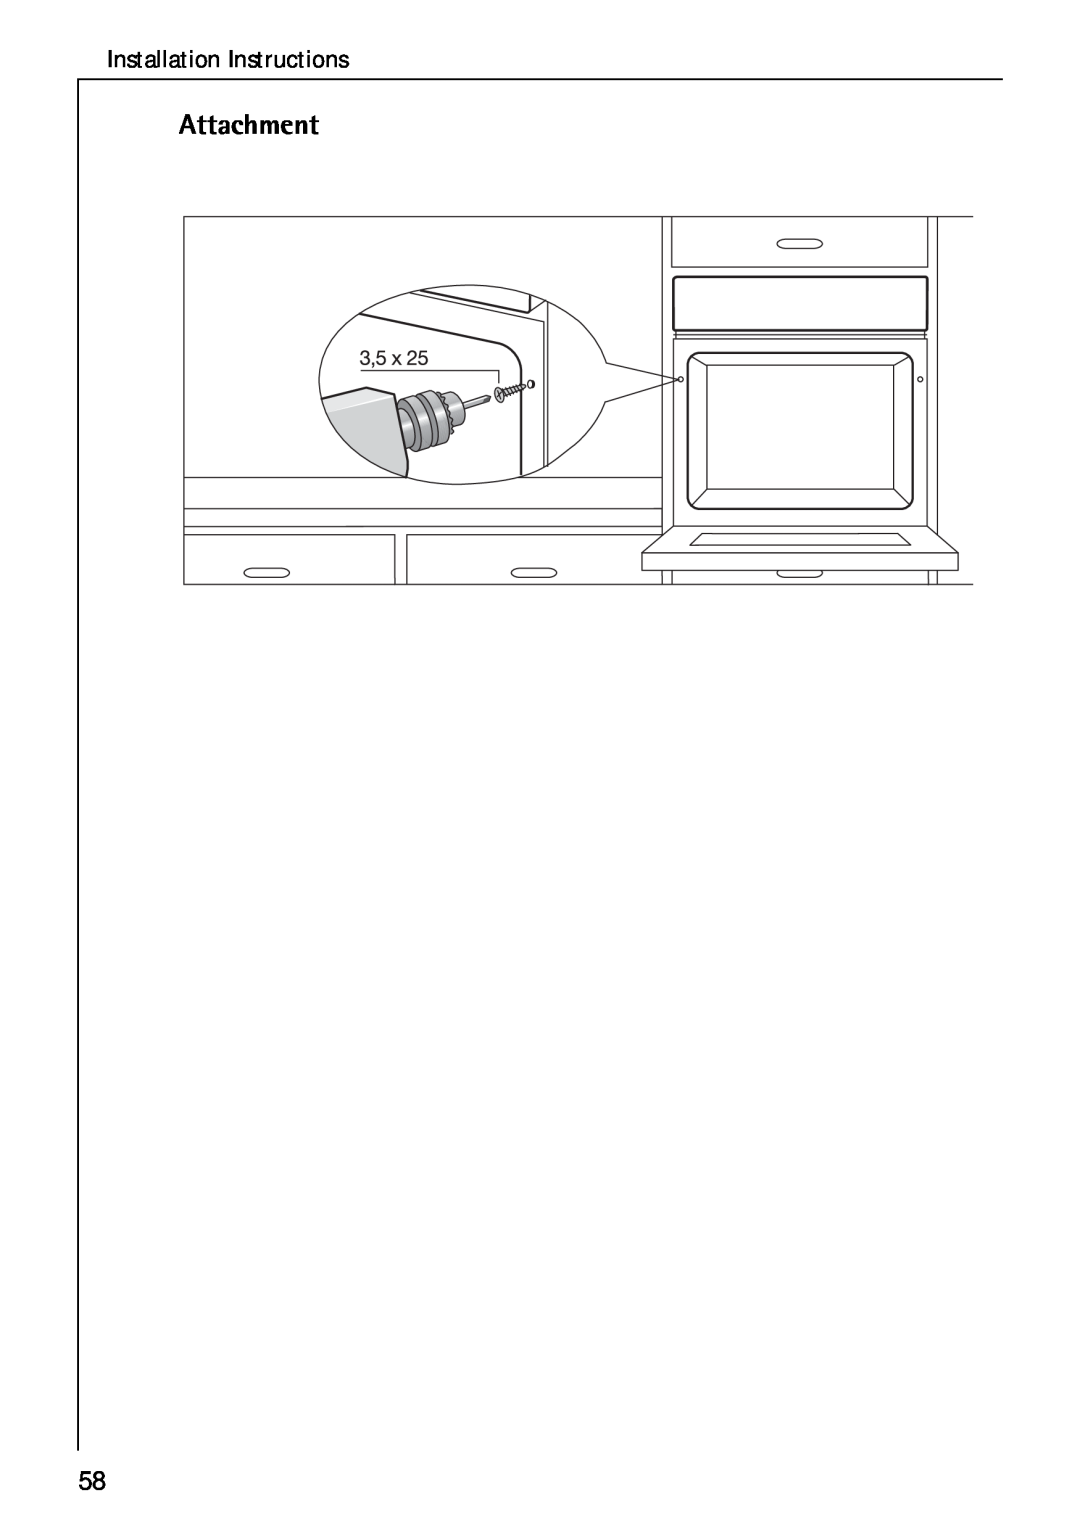 Electrolux B 4100 manual Installation Instructions, Attachment 